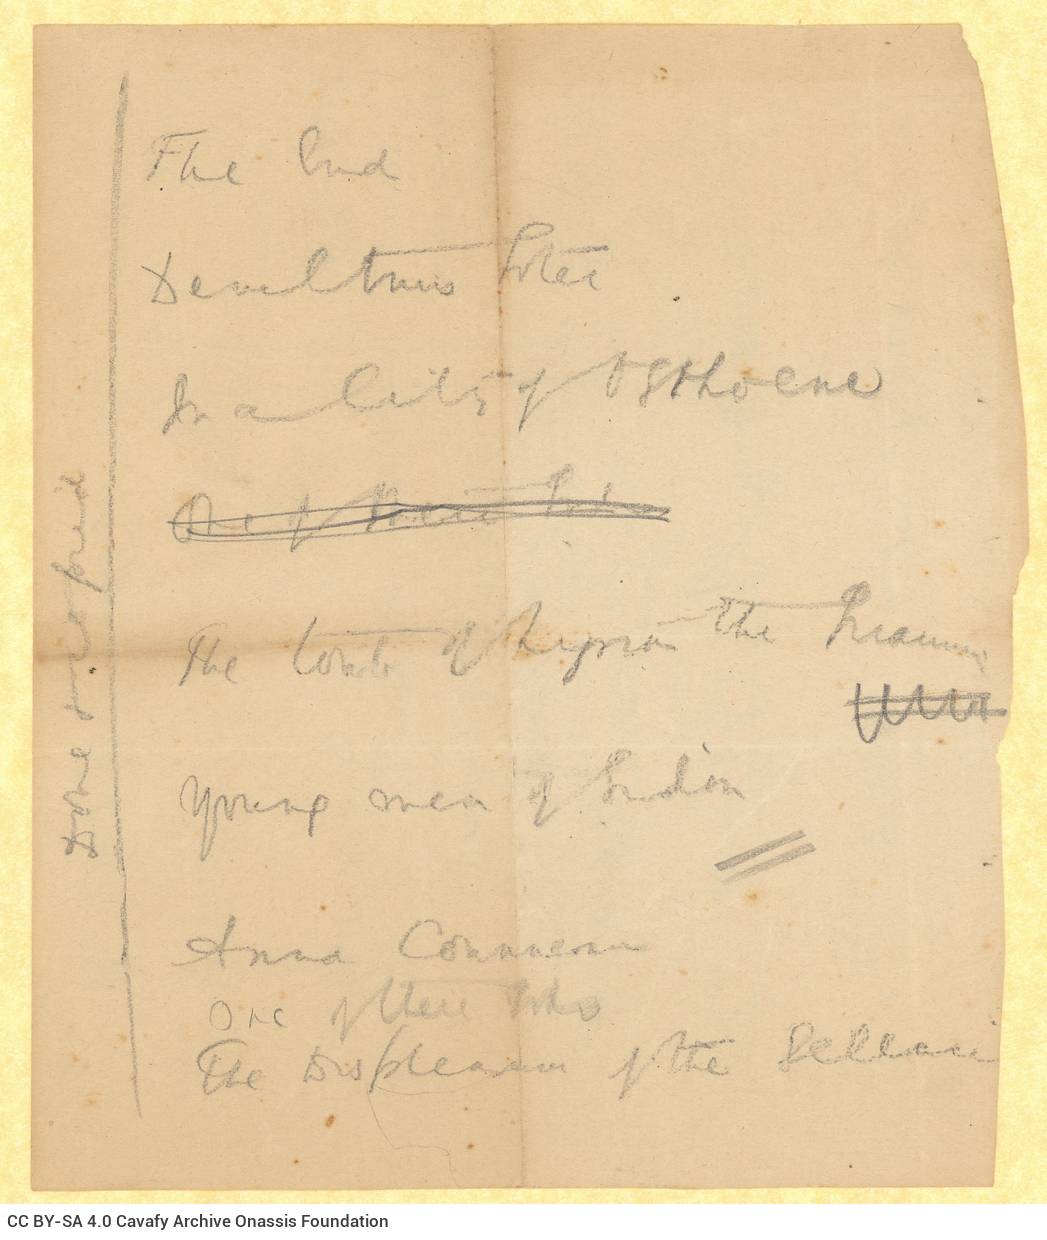 Handwritten titles of 19 poems by Cavafy, translated into English, on either side of a piece of paper. One of the titles has 